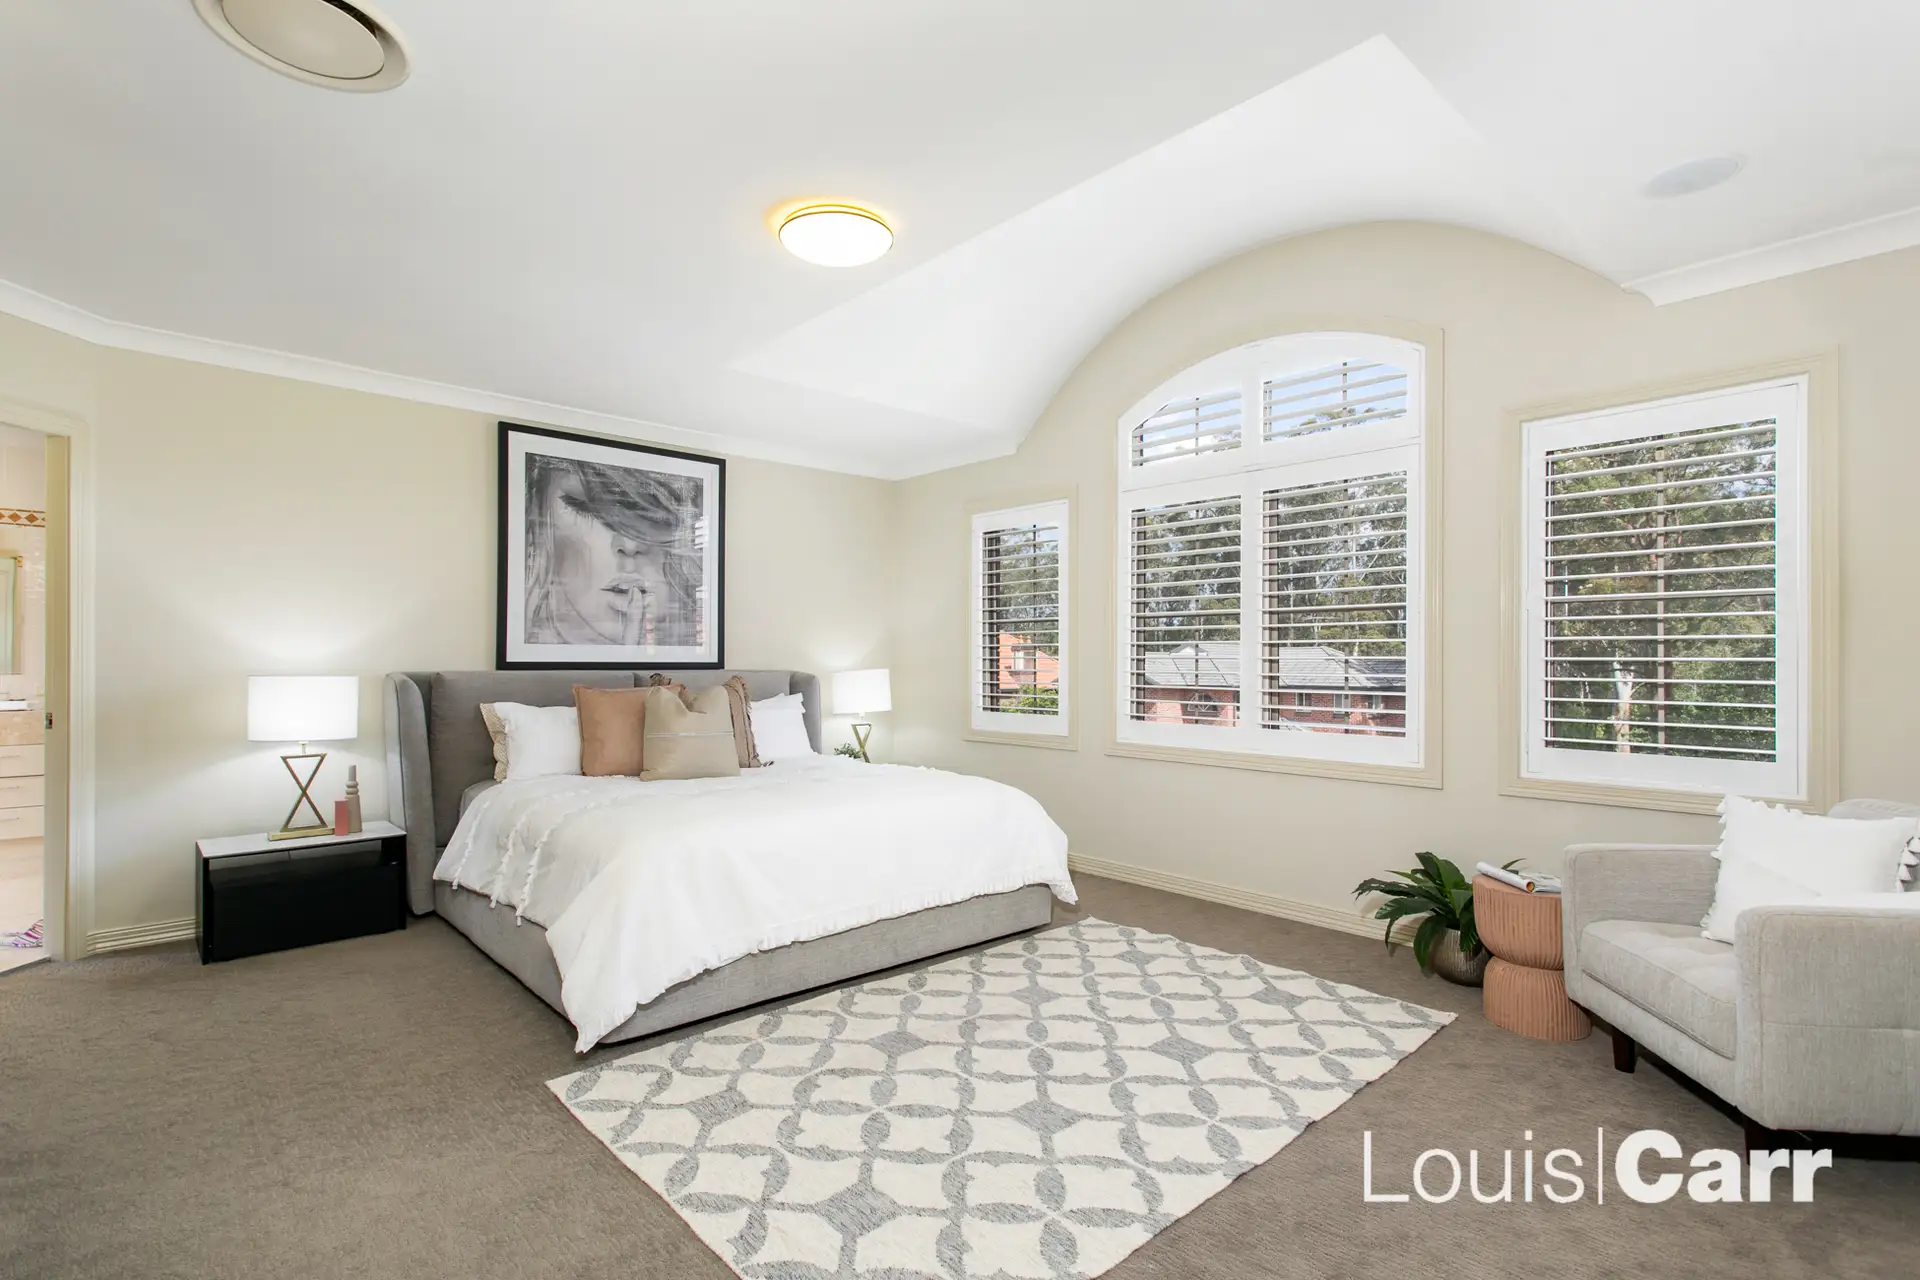 Photo #12: 32 Kambah Place, West Pennant Hills - Sold by Louis Carr Real Estate